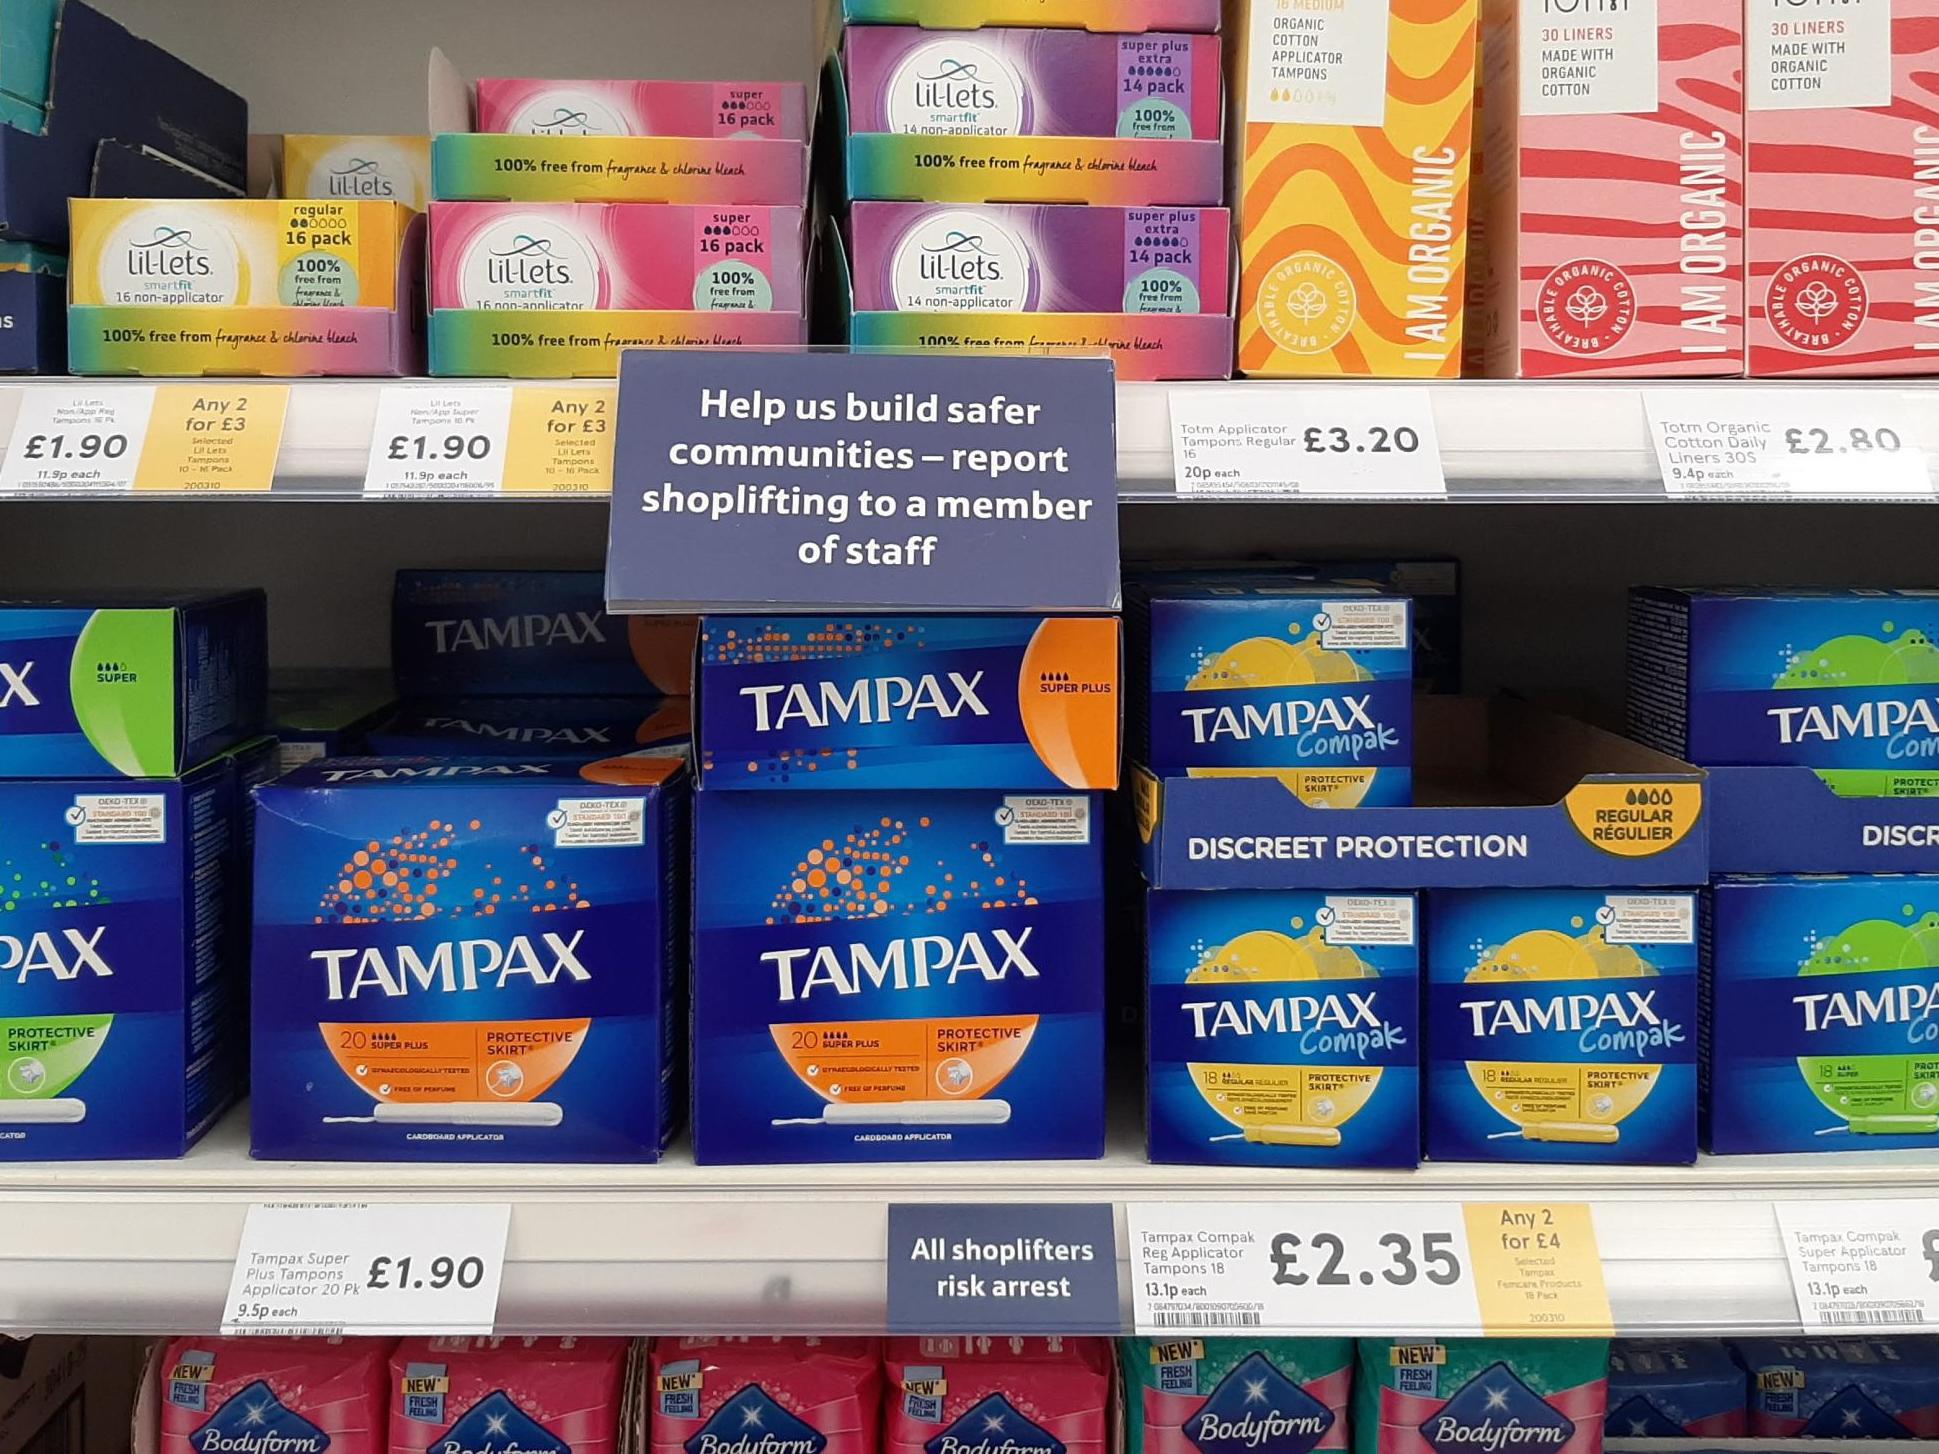 Anti-stealing warnings in front of tampons get backlash from womens groups The Independent The Independent picture